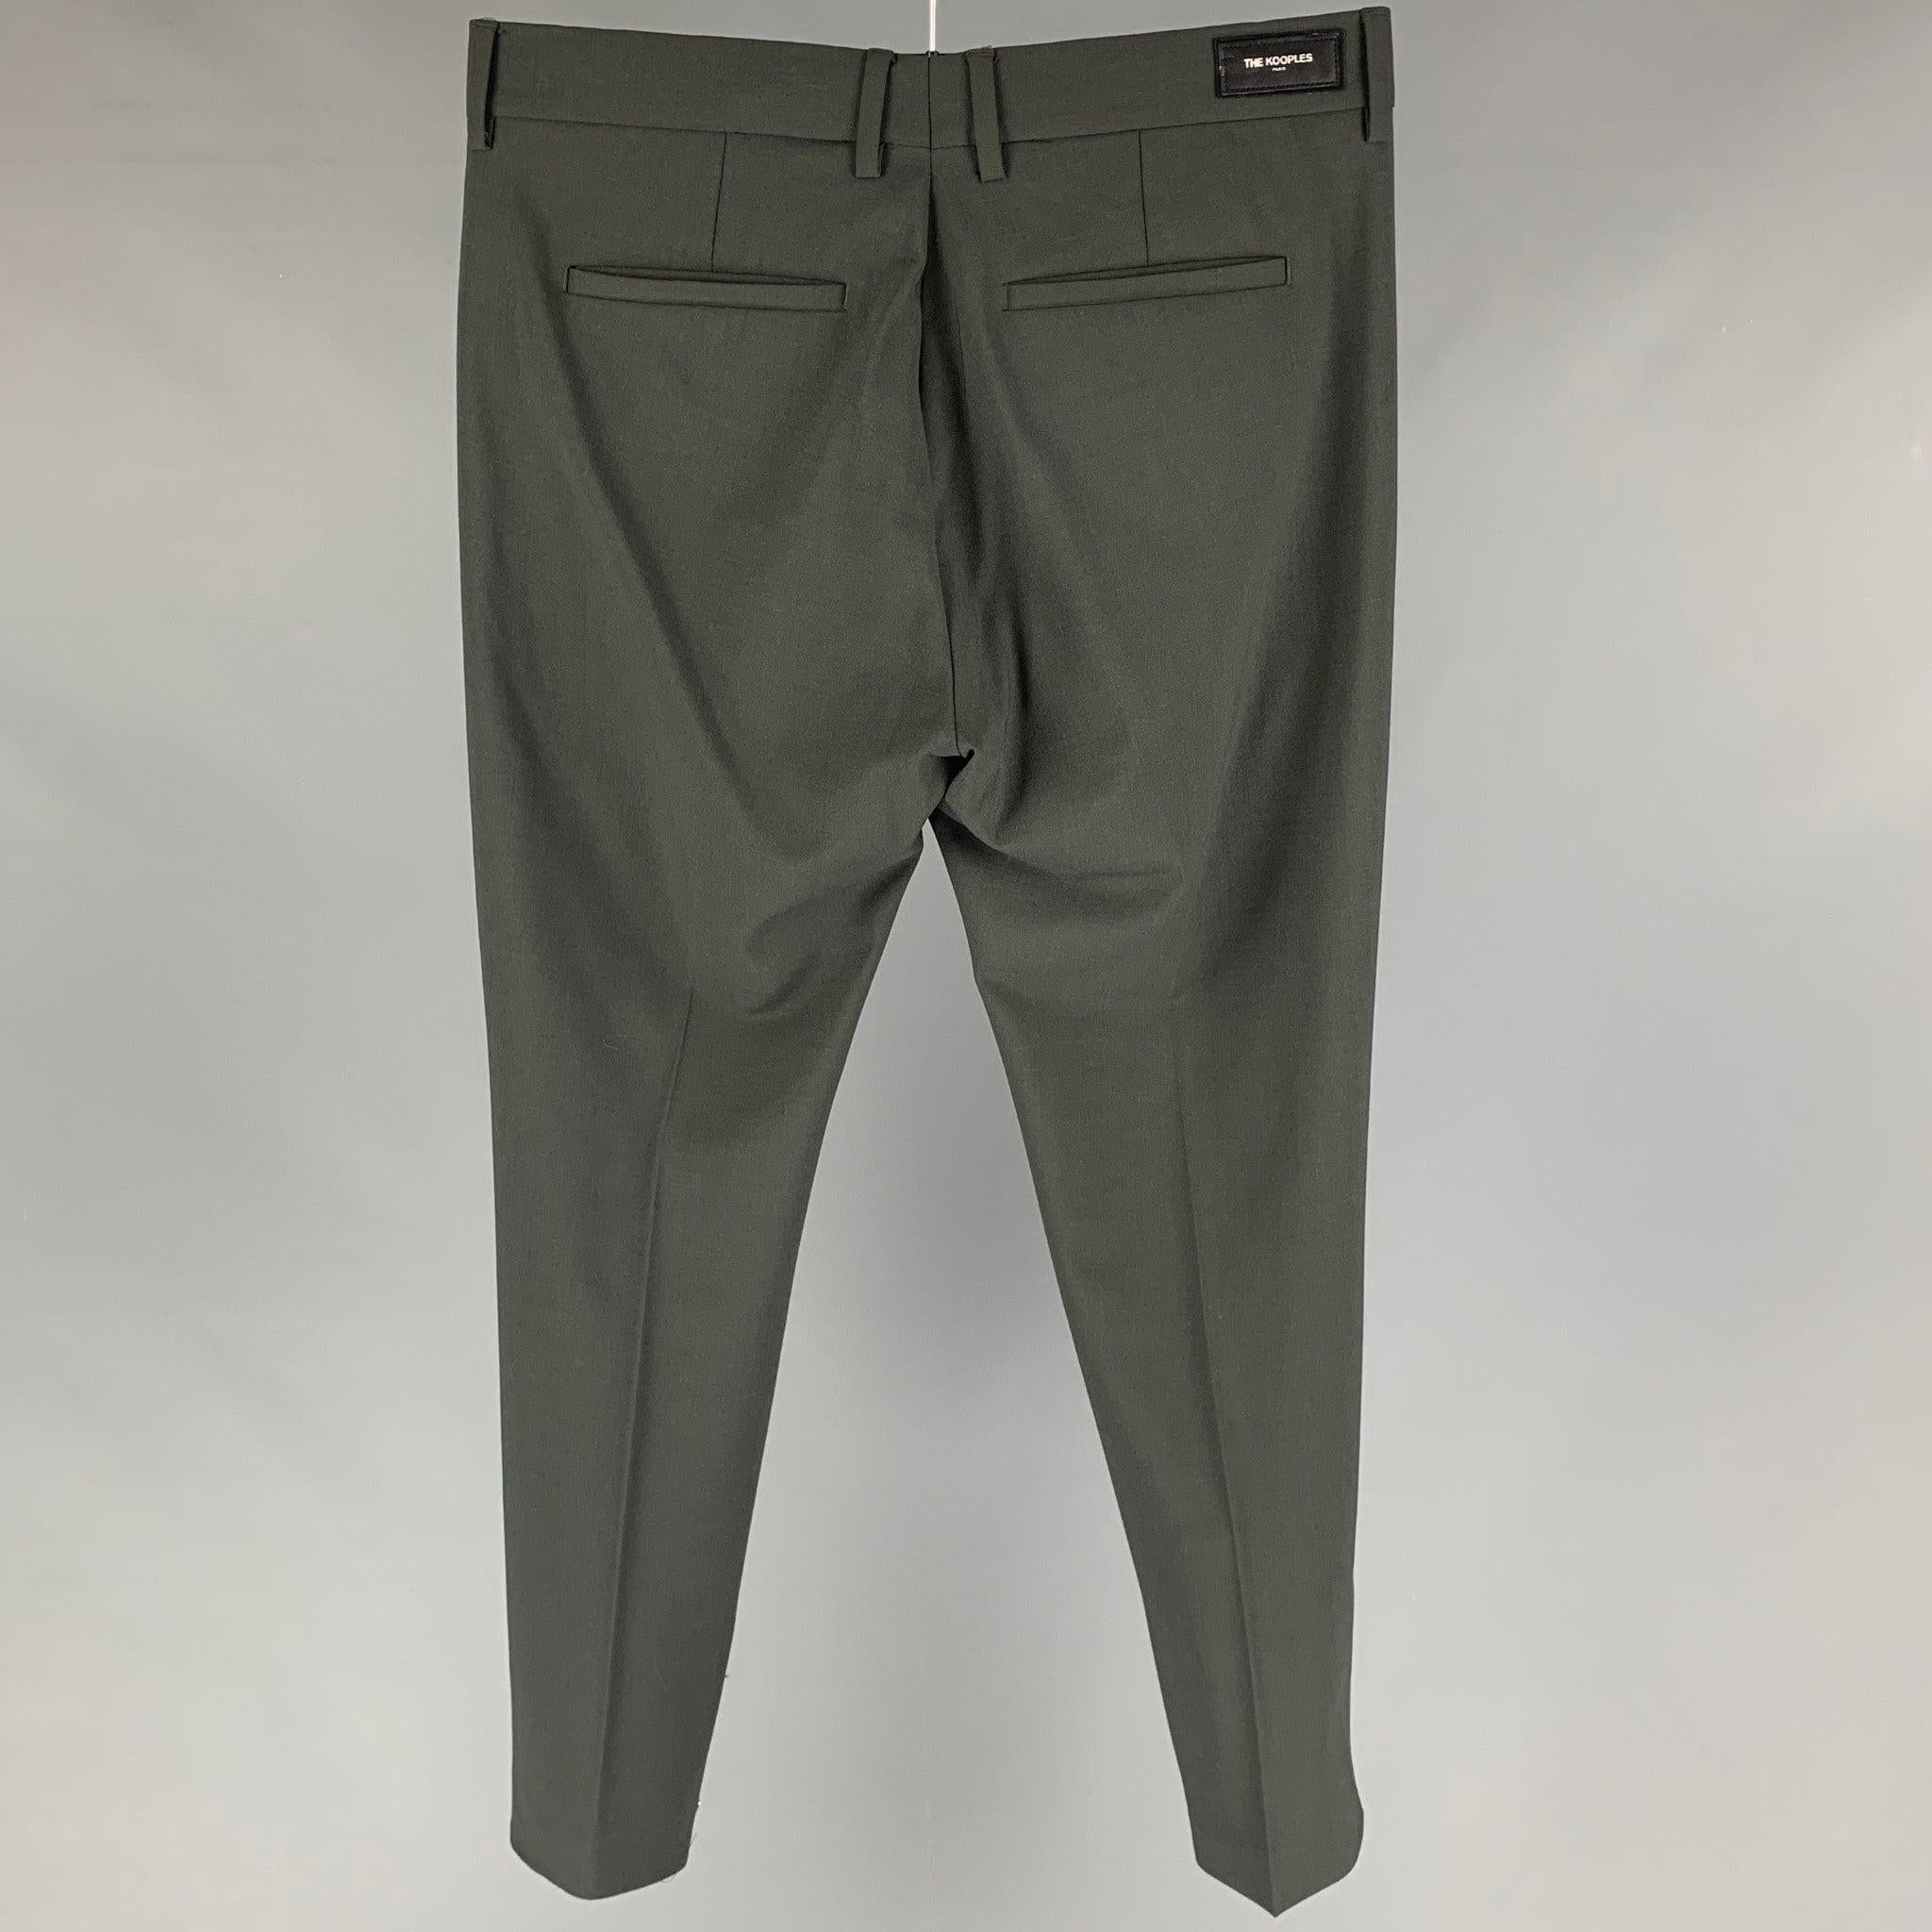 THE KOOPLES Size 30 Green Wool Zip Fly Dress Pants In Good Condition For Sale In San Francisco, CA